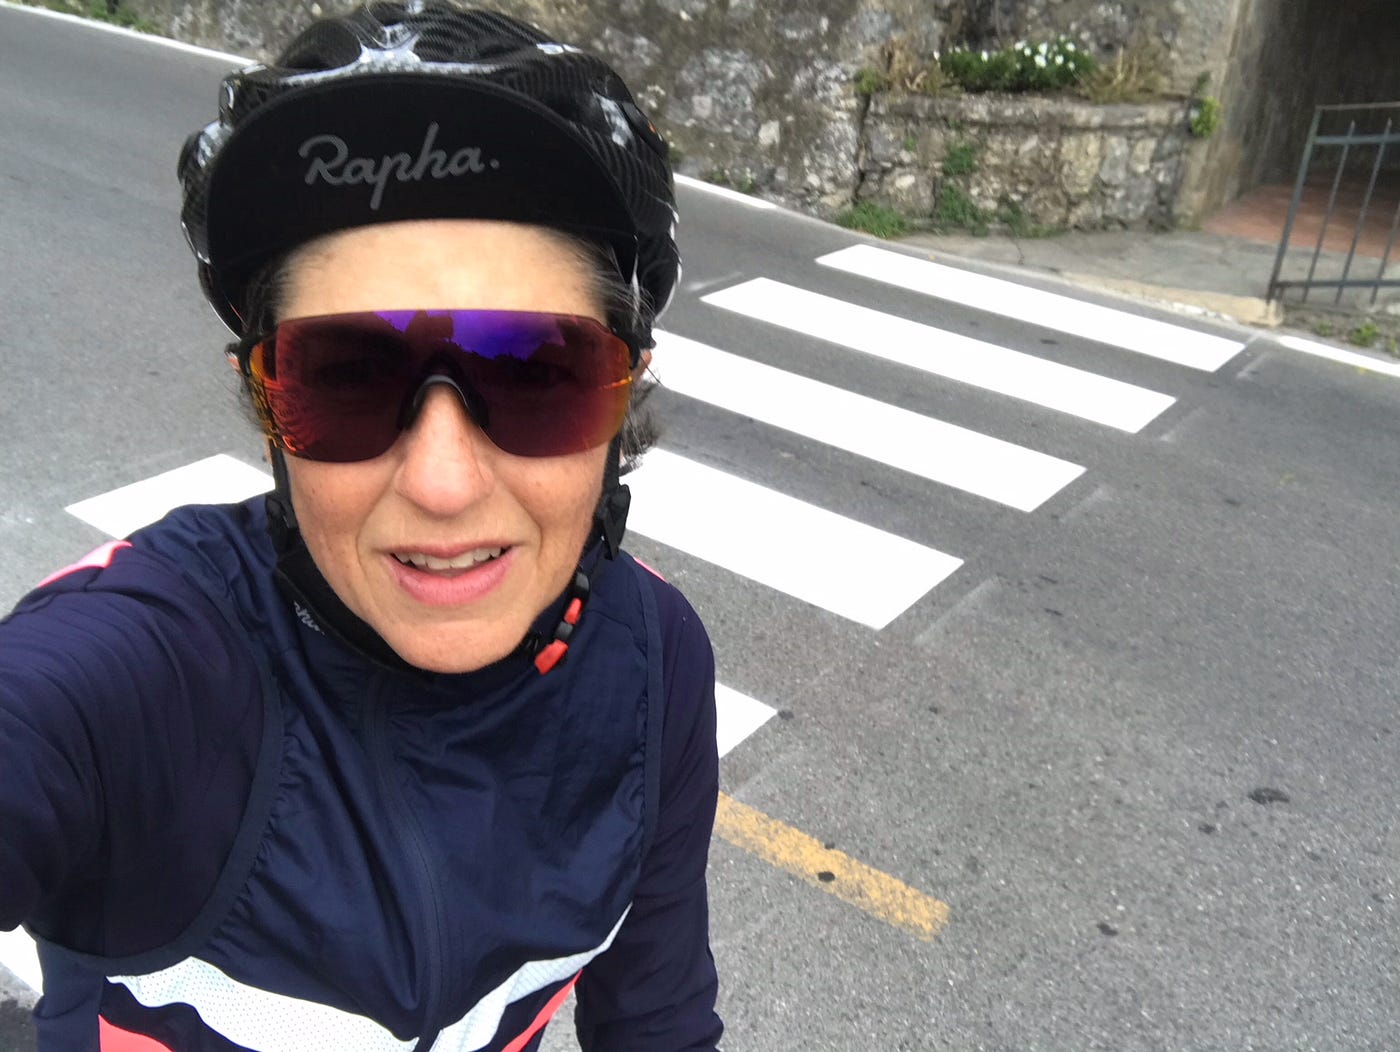 Testing Oakley's EVZERO™ Stride. After years of riding with a Rudy